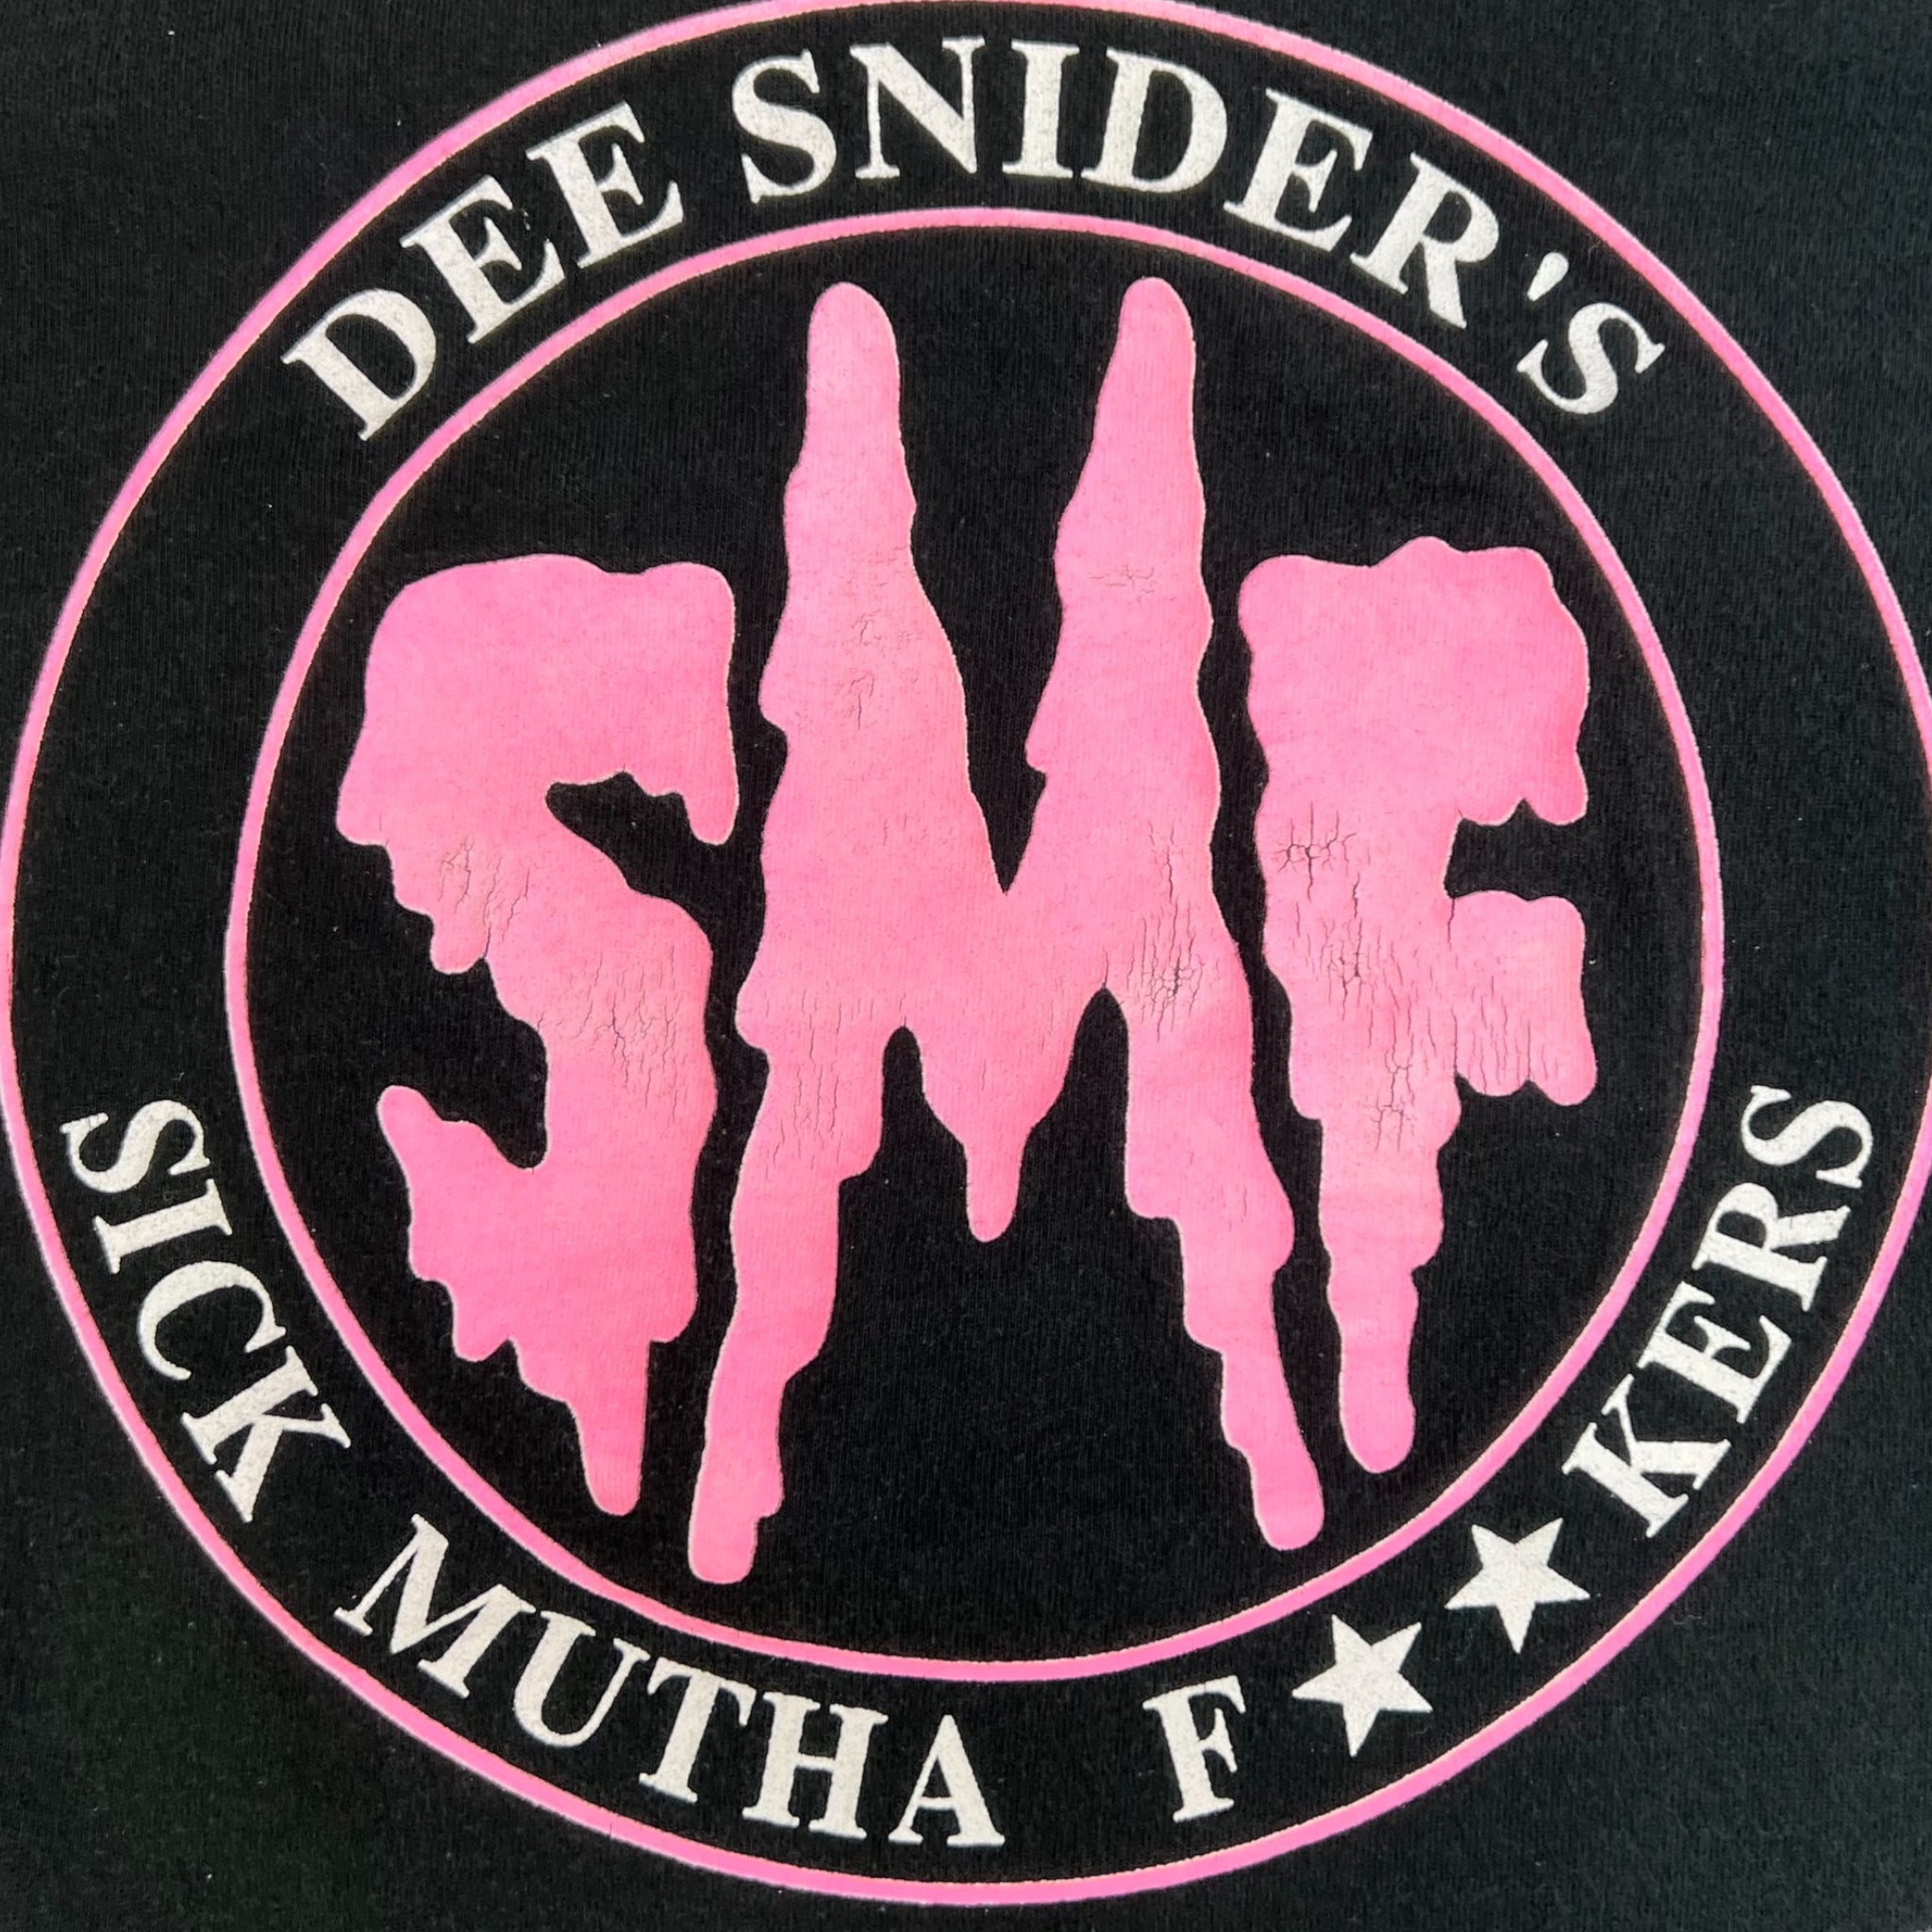 Vintage Dee Snider’s Sick Mutha F**kers Tee